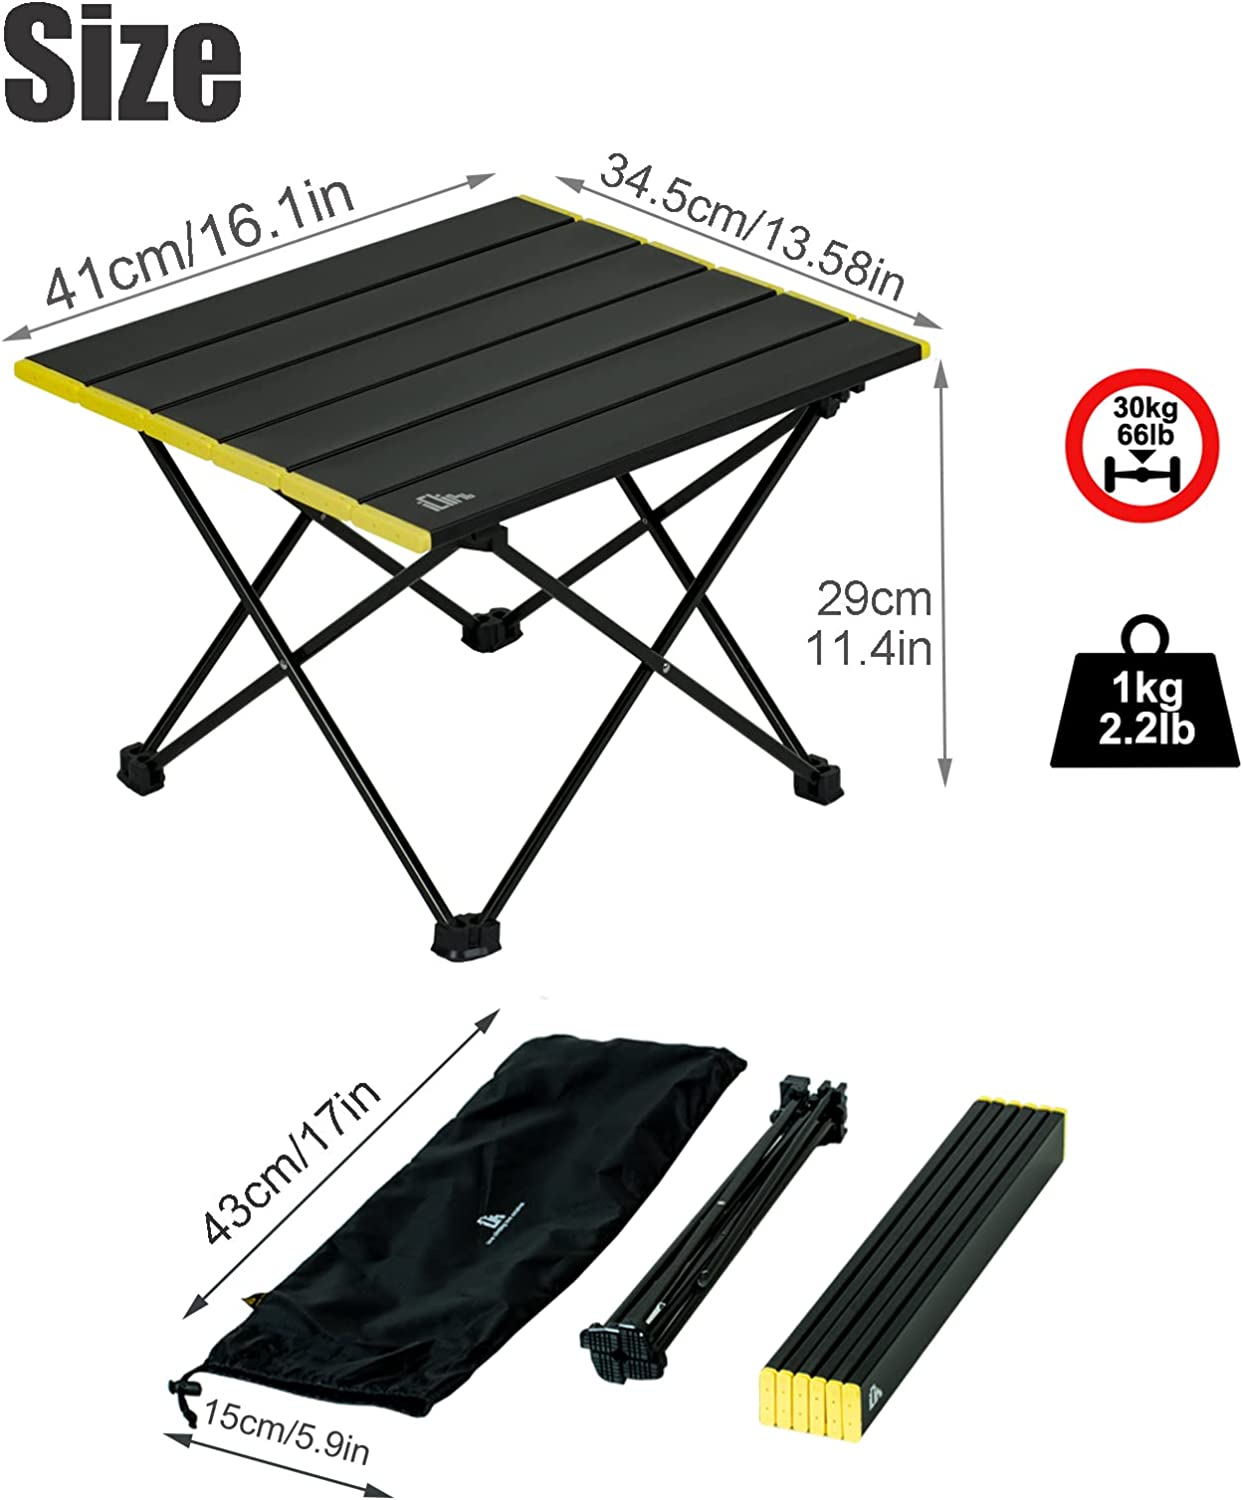 iClimb Ultralight Compact Camping Alu. Folding Table with Carry Bag, Two Size (Black - S)